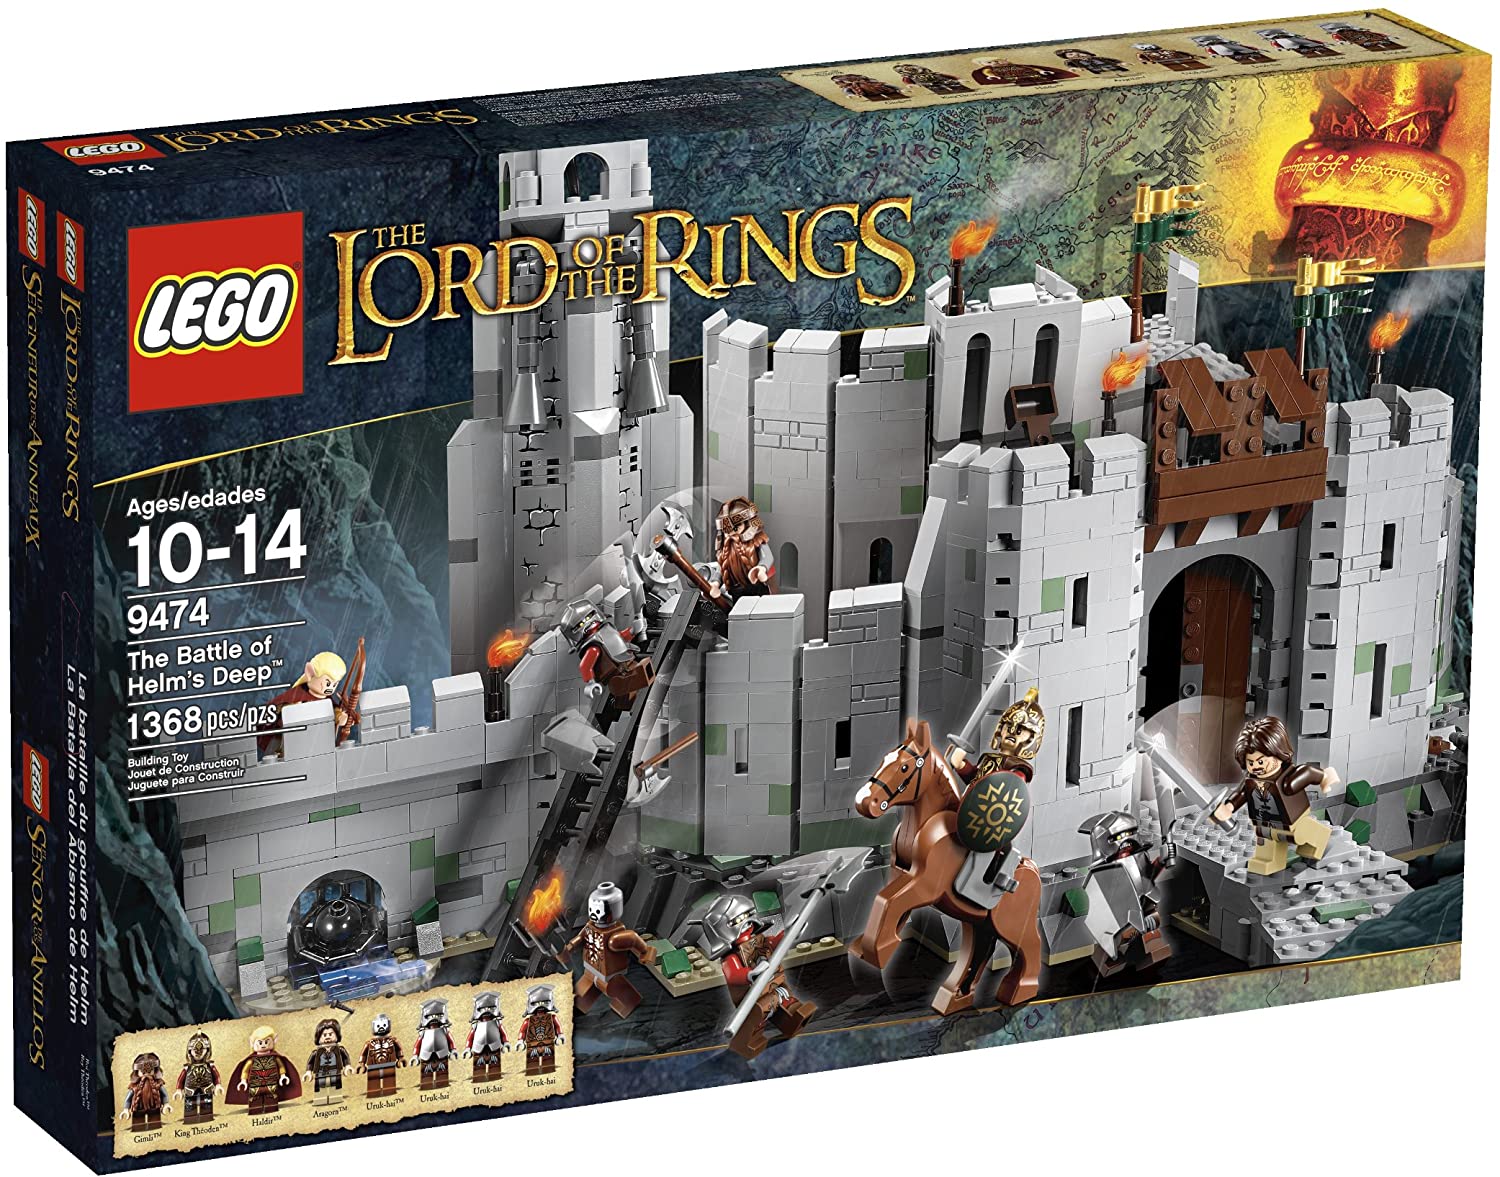 LEGO The Lord of the Rings The Orc Forge Set 9476 - US